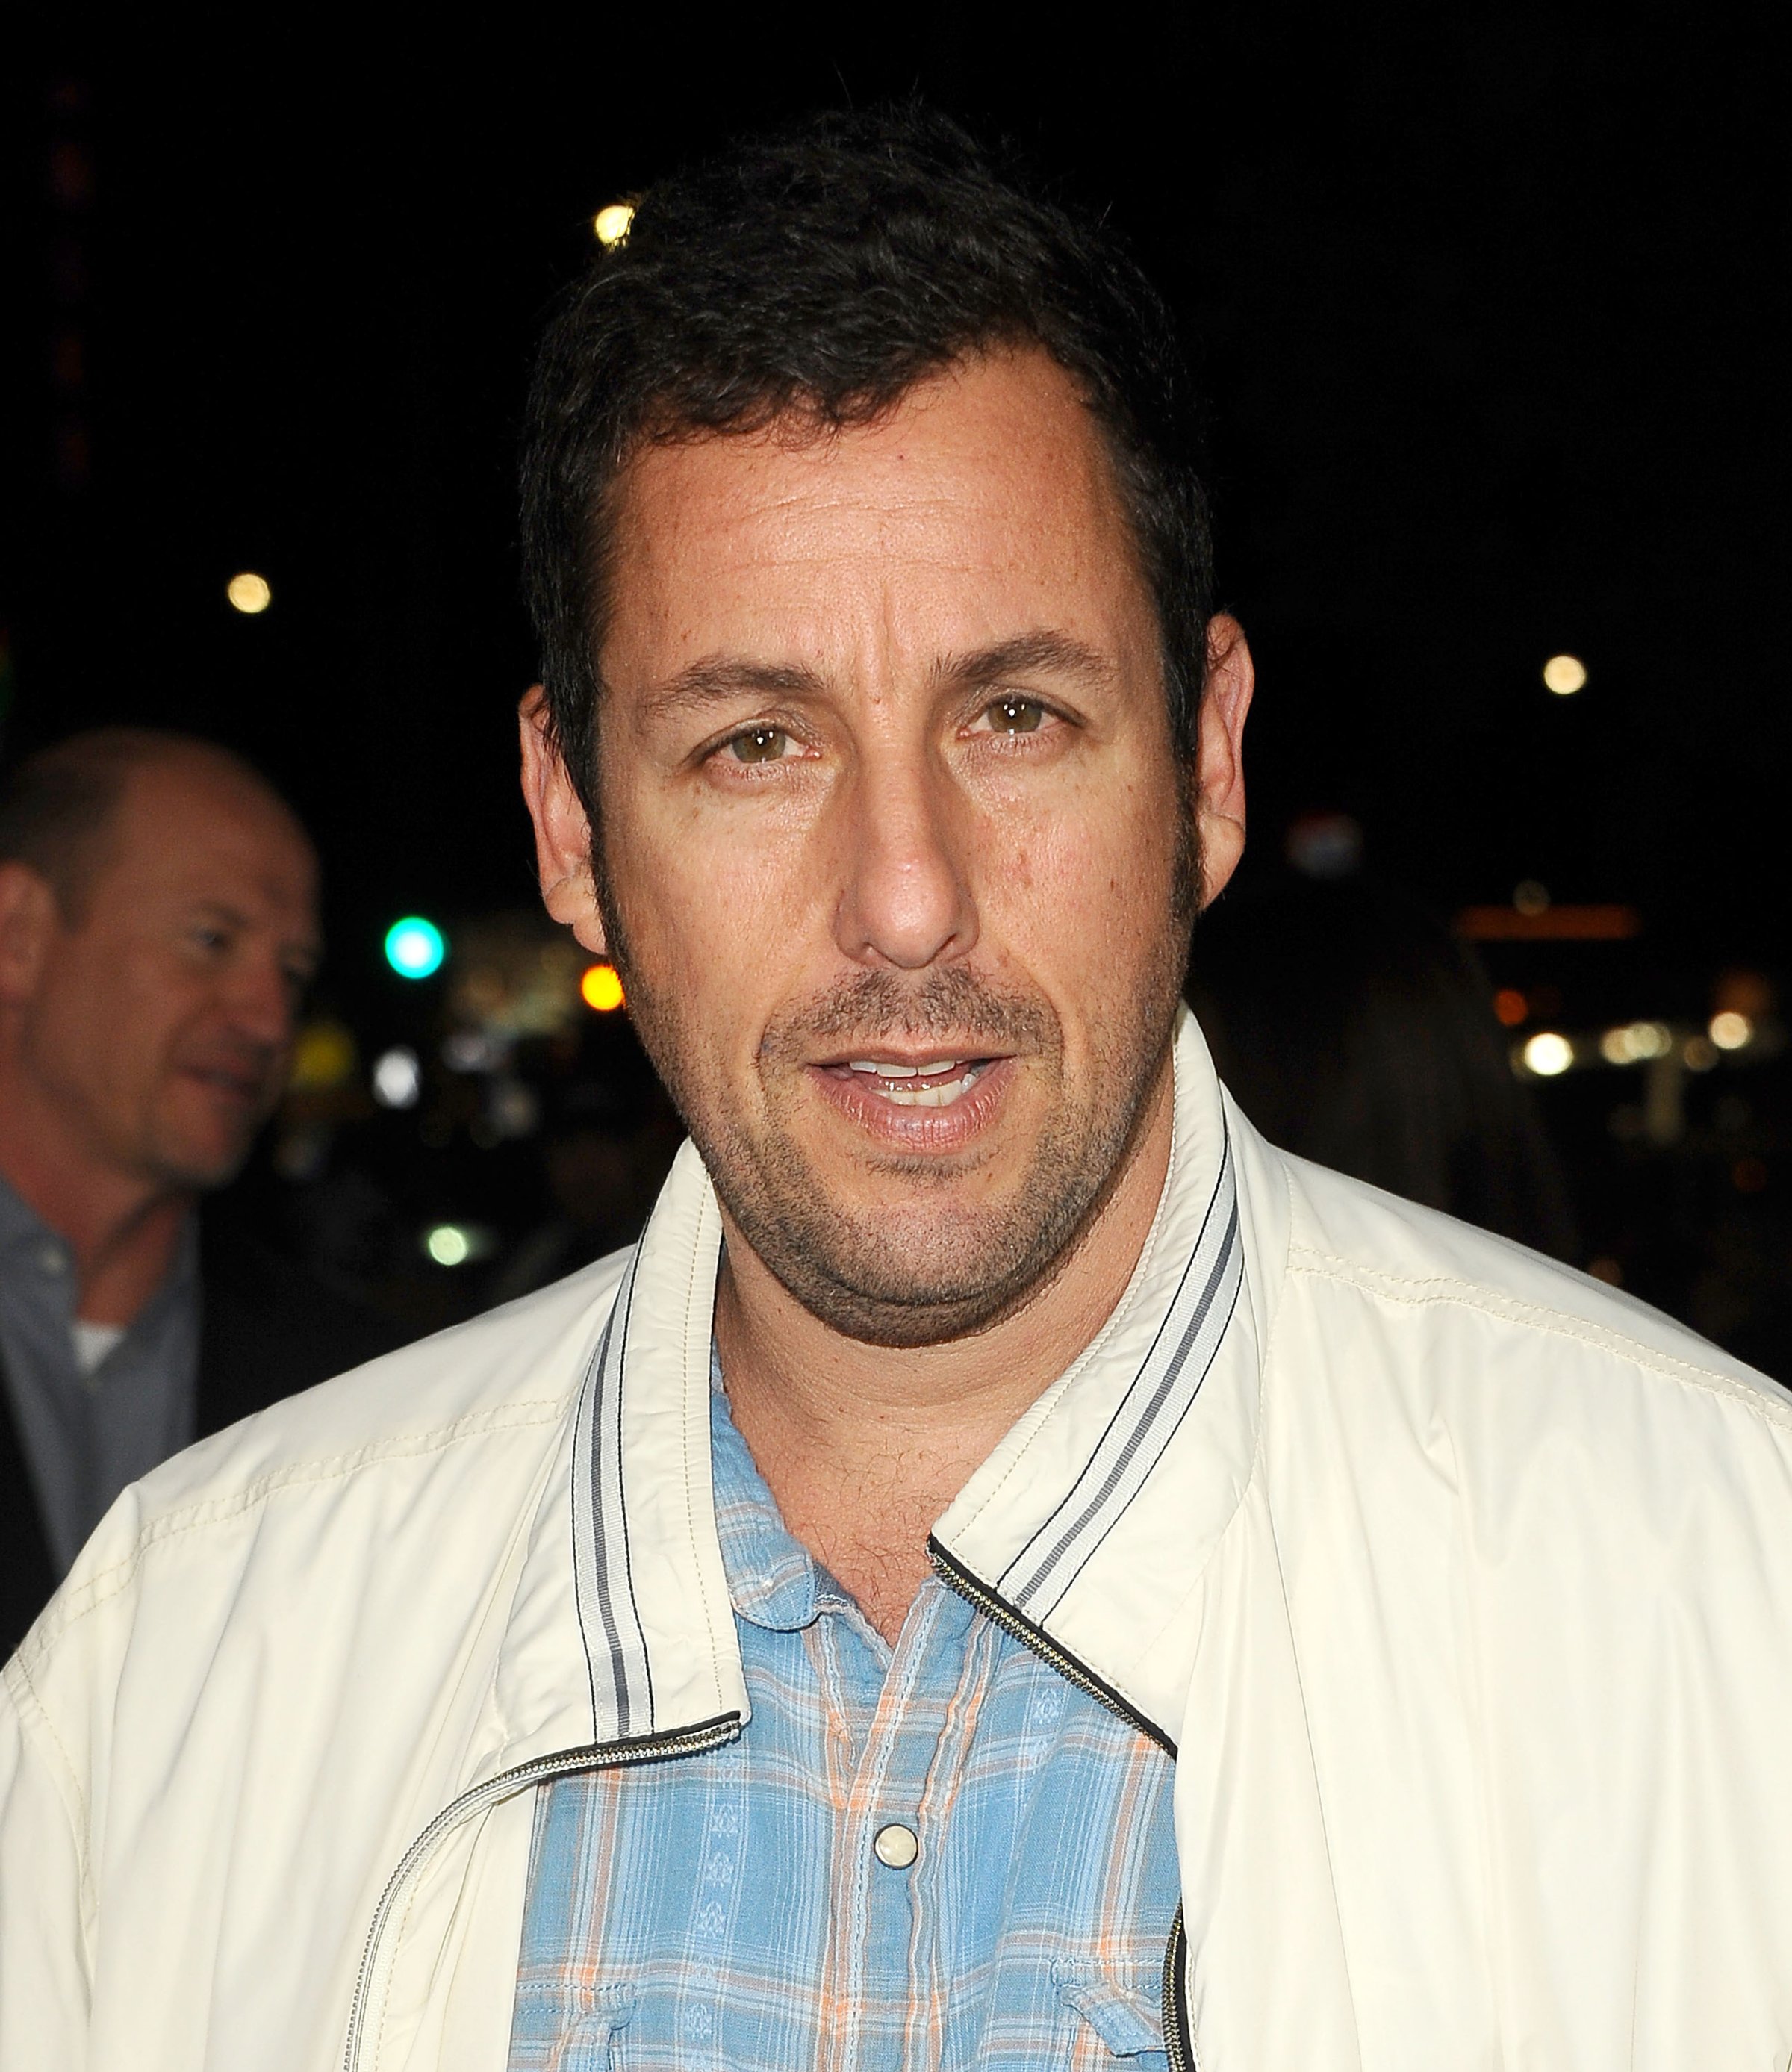 Actor Adam Sandler at the premiere of "Men, Women and Children" in Los Angeles, Ca. on Sep. 30, 2014.